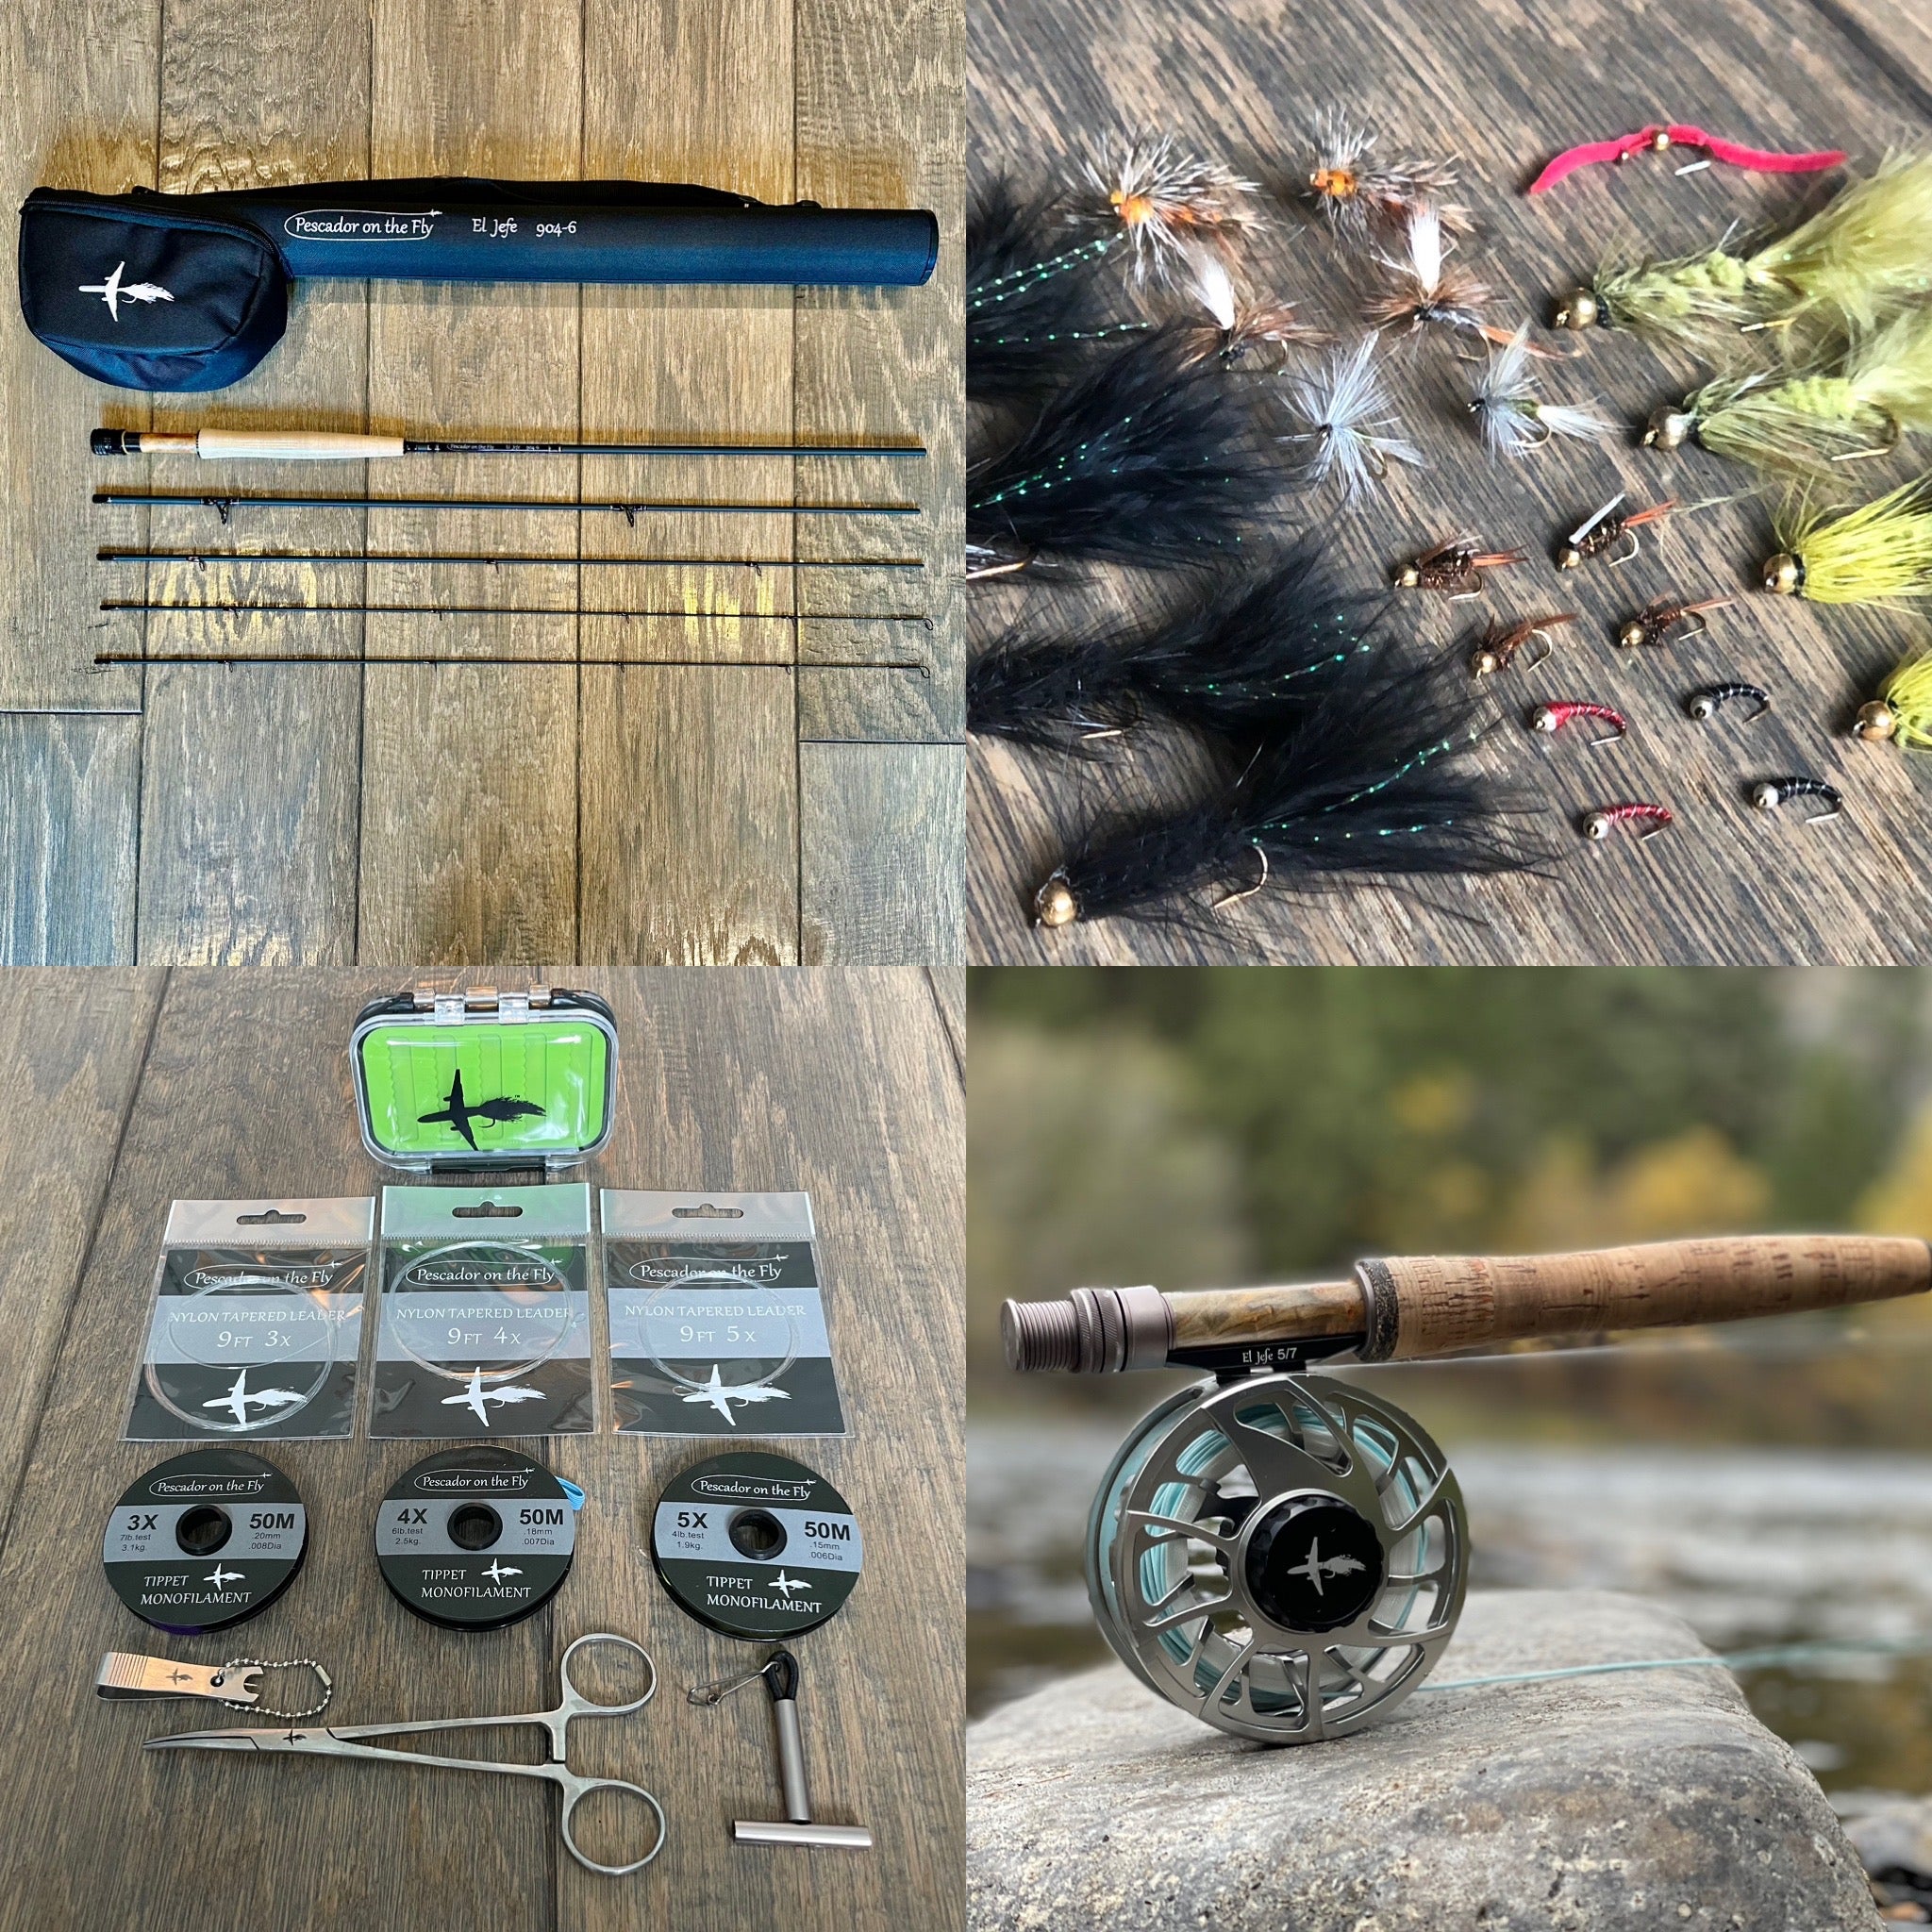  Fly Fishing Rod 6 feet 0/1wt 3 Pieces Portable Carbon